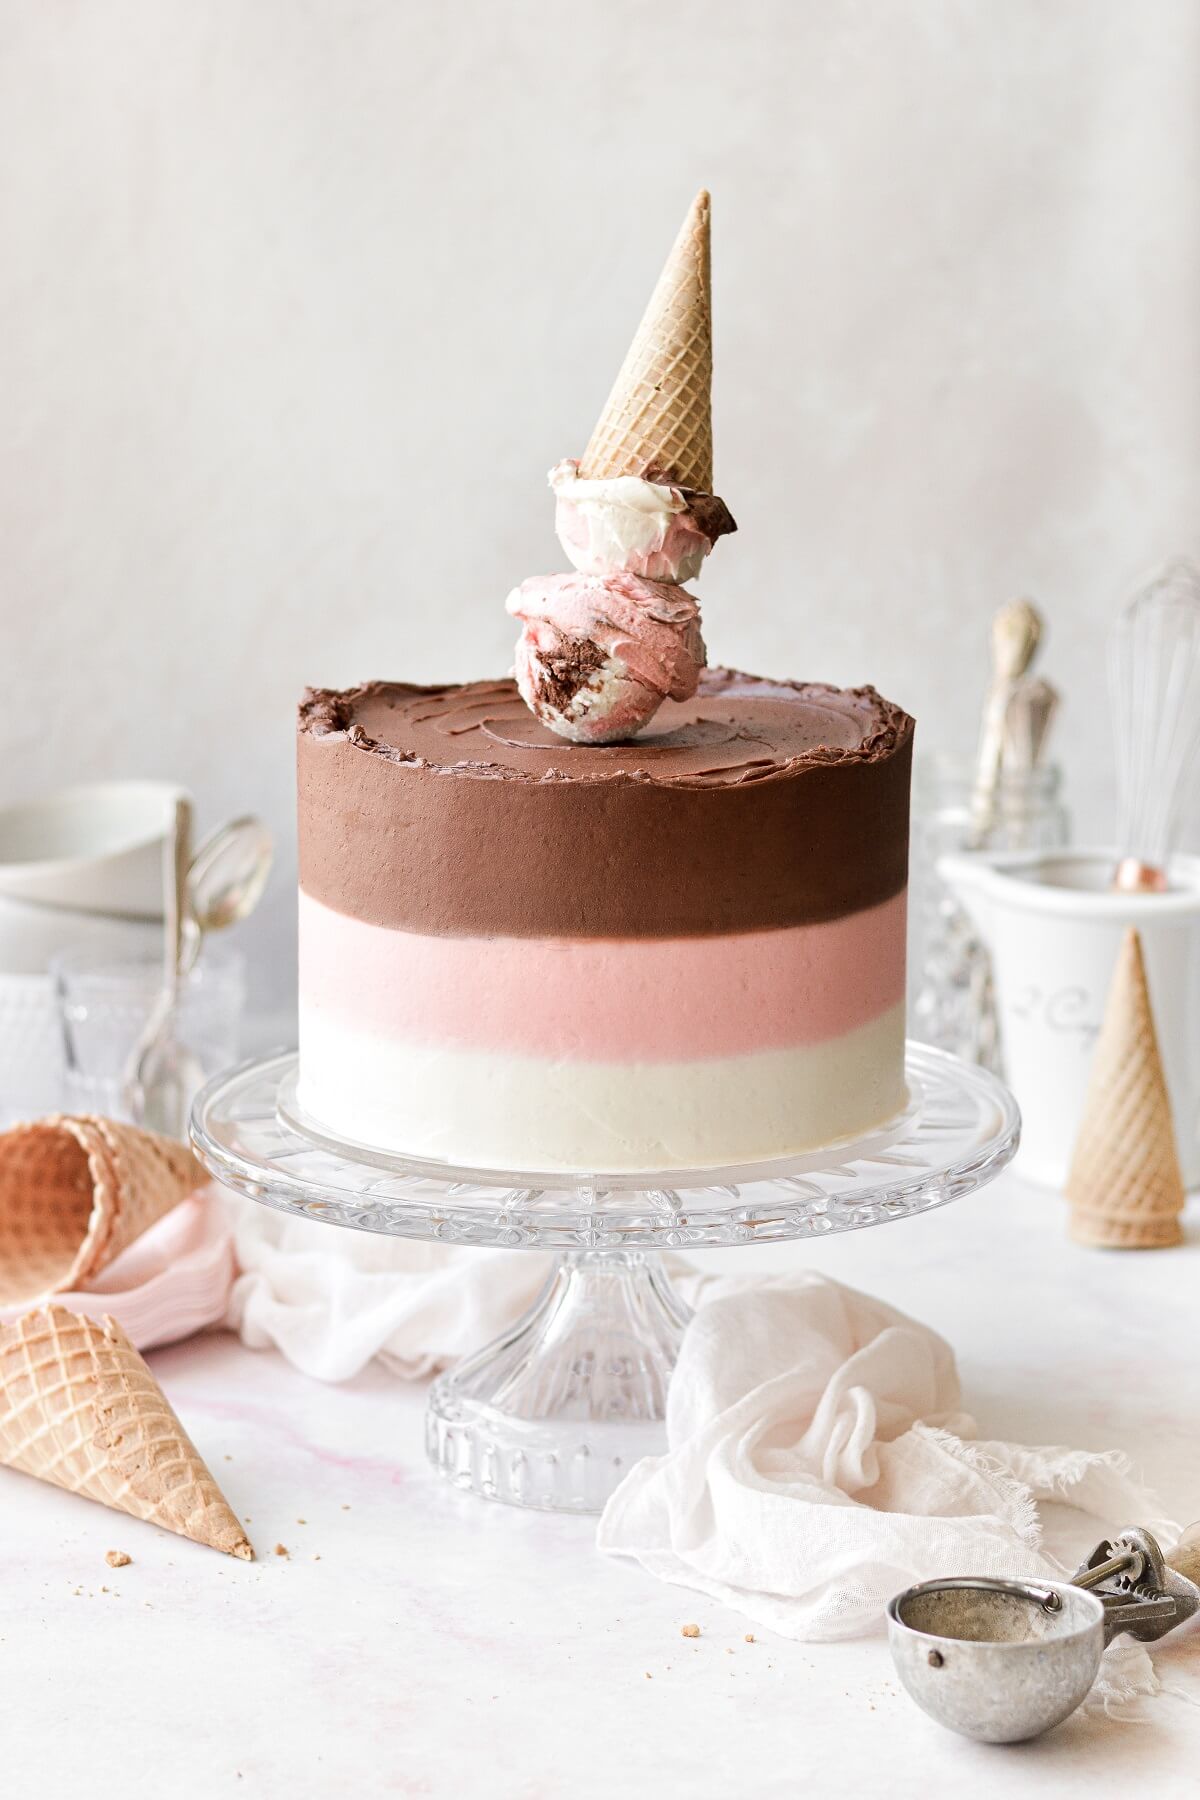 Neapolitan cake with striped buttercream and an ice cream cone cake topper.